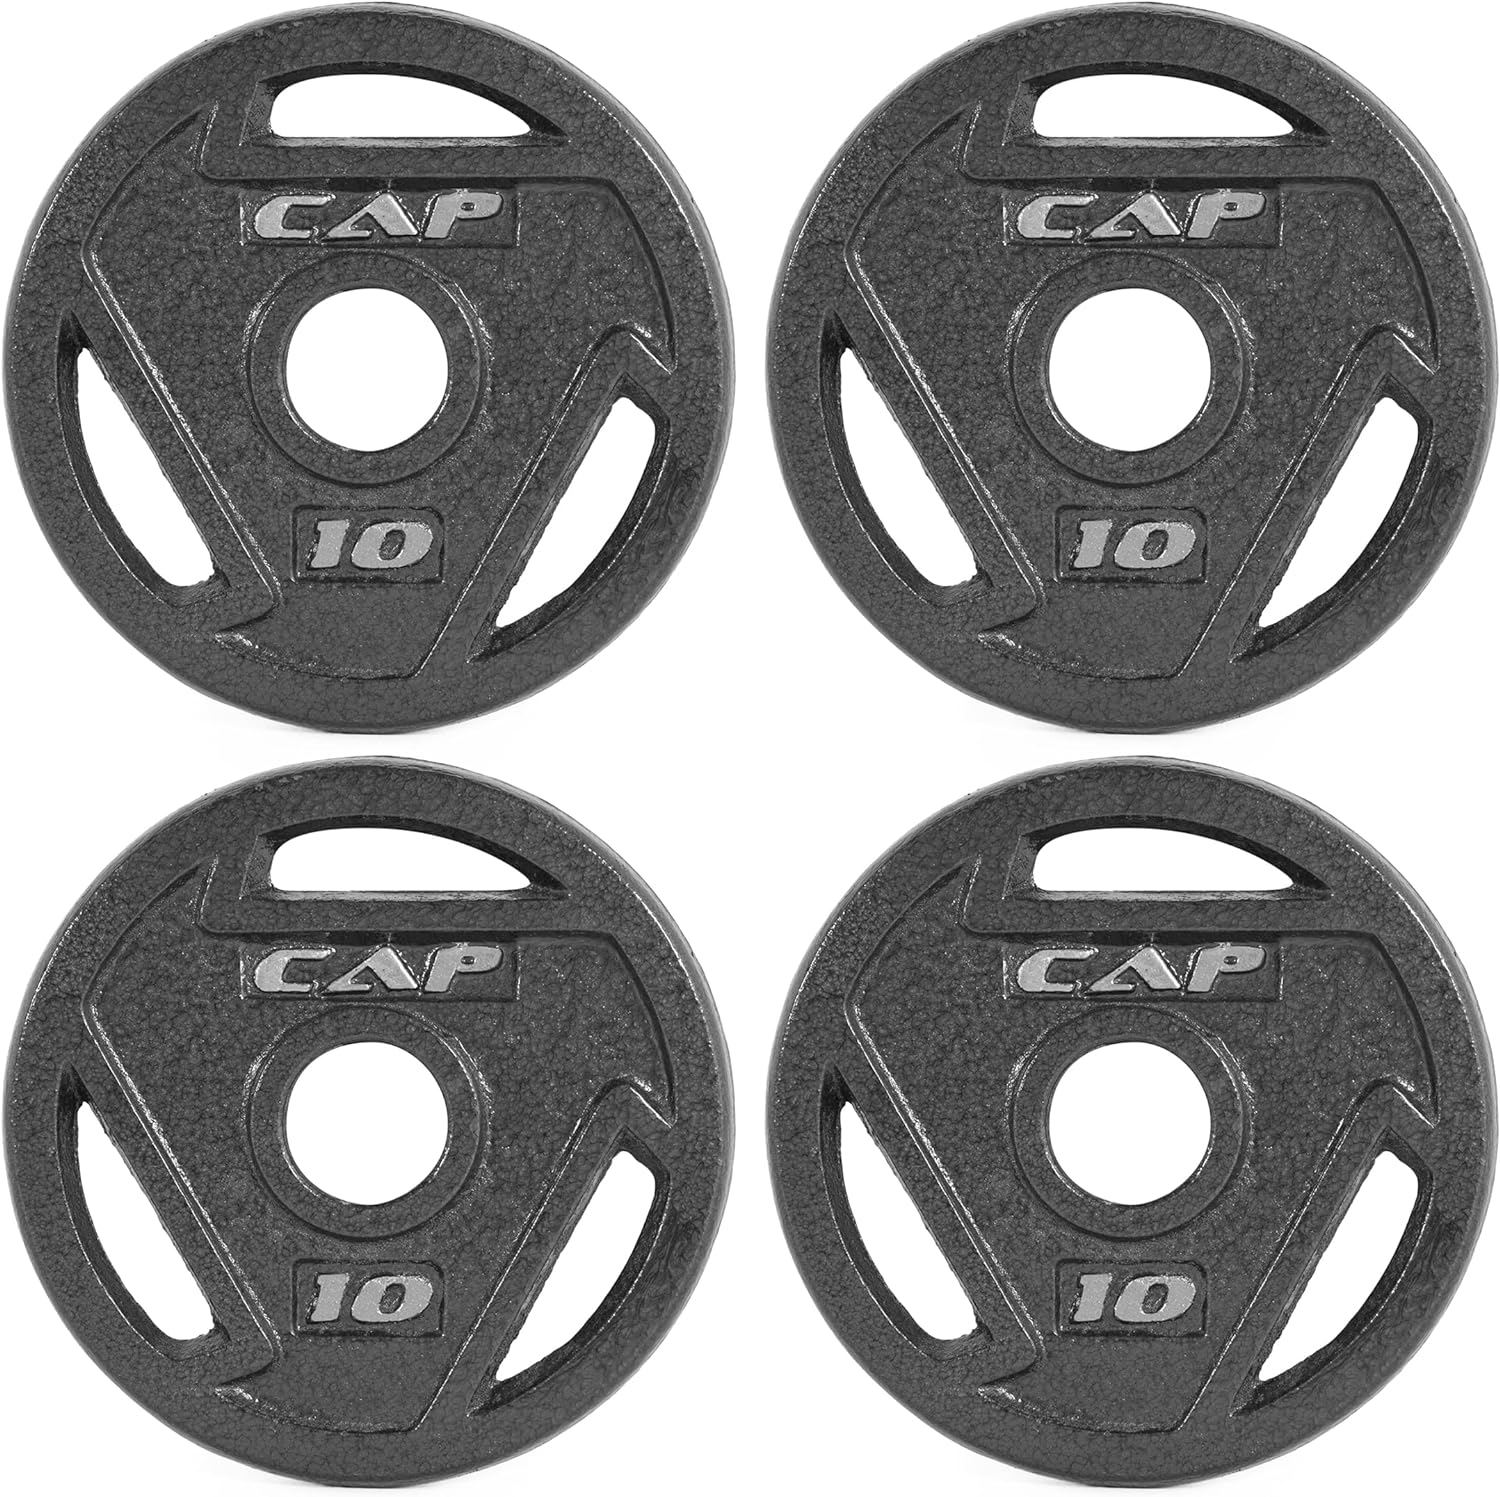 4-Pack 10-lb CAP Barbell 2" Olympic Grip Weight Plate Set $35.22 ($8.81 Each) + Free Shipping